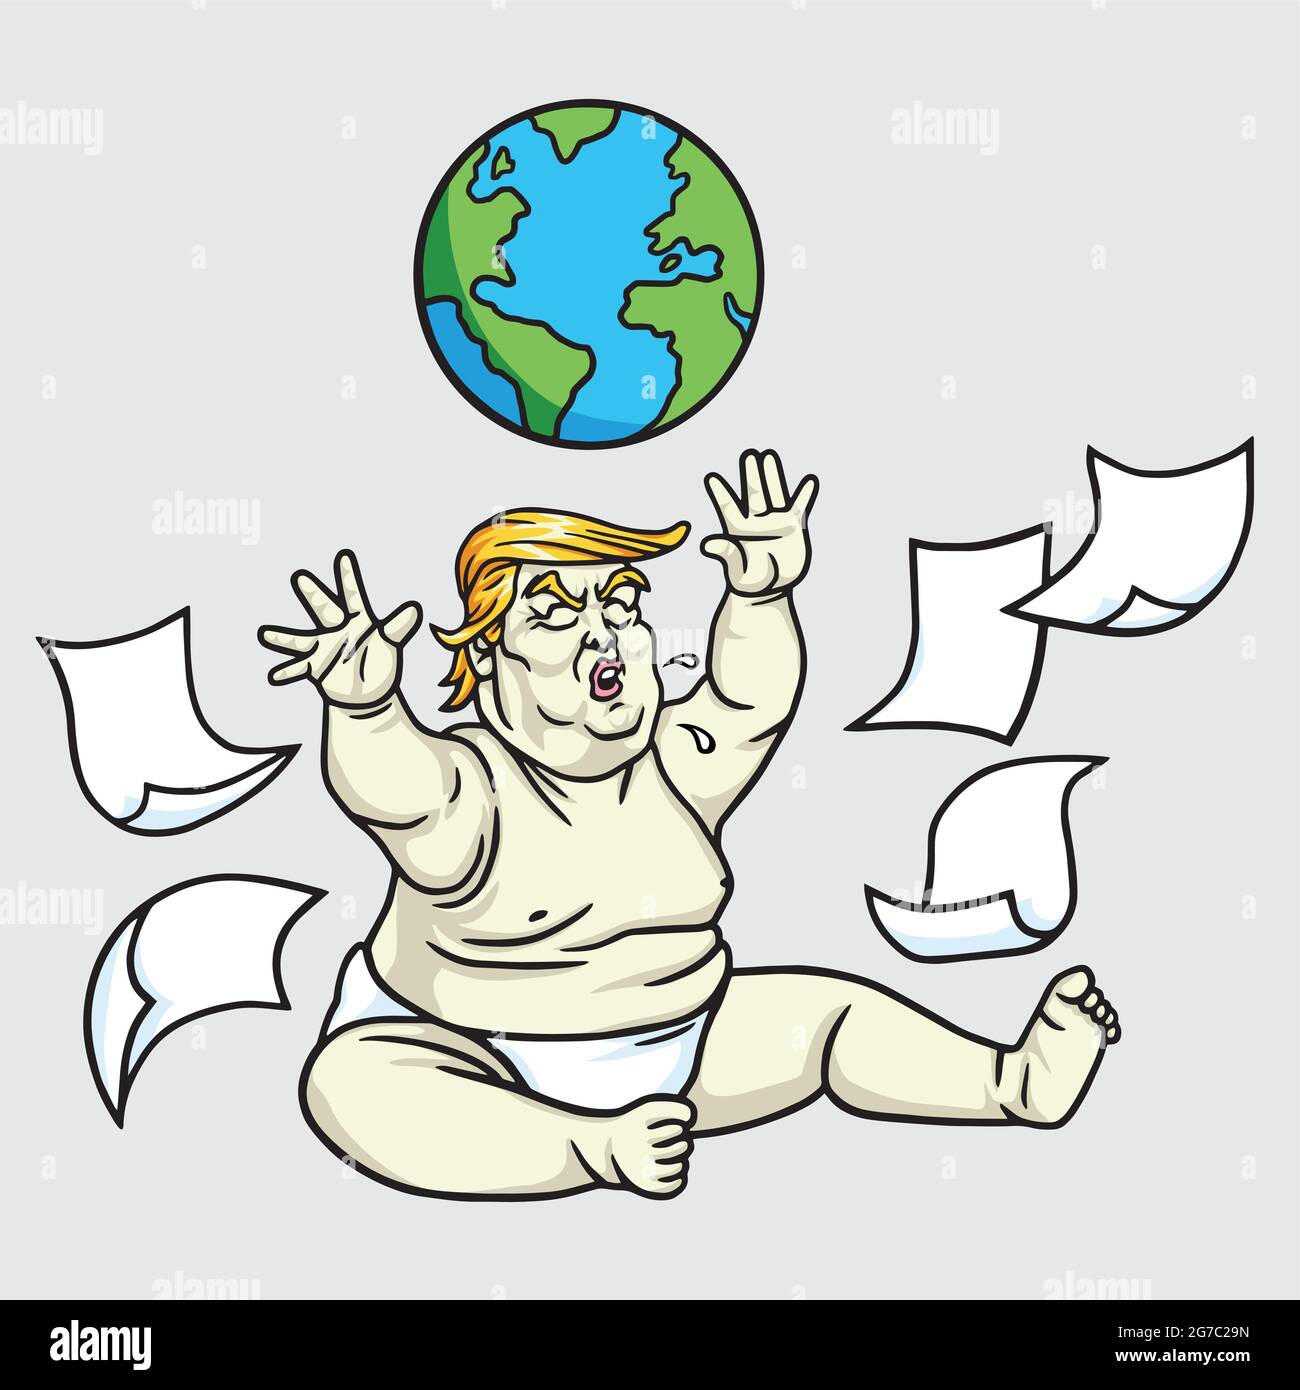 Donald Trump the Big Baby Playing Globe with Messy Papers Cartoon Illustration Stock Vector